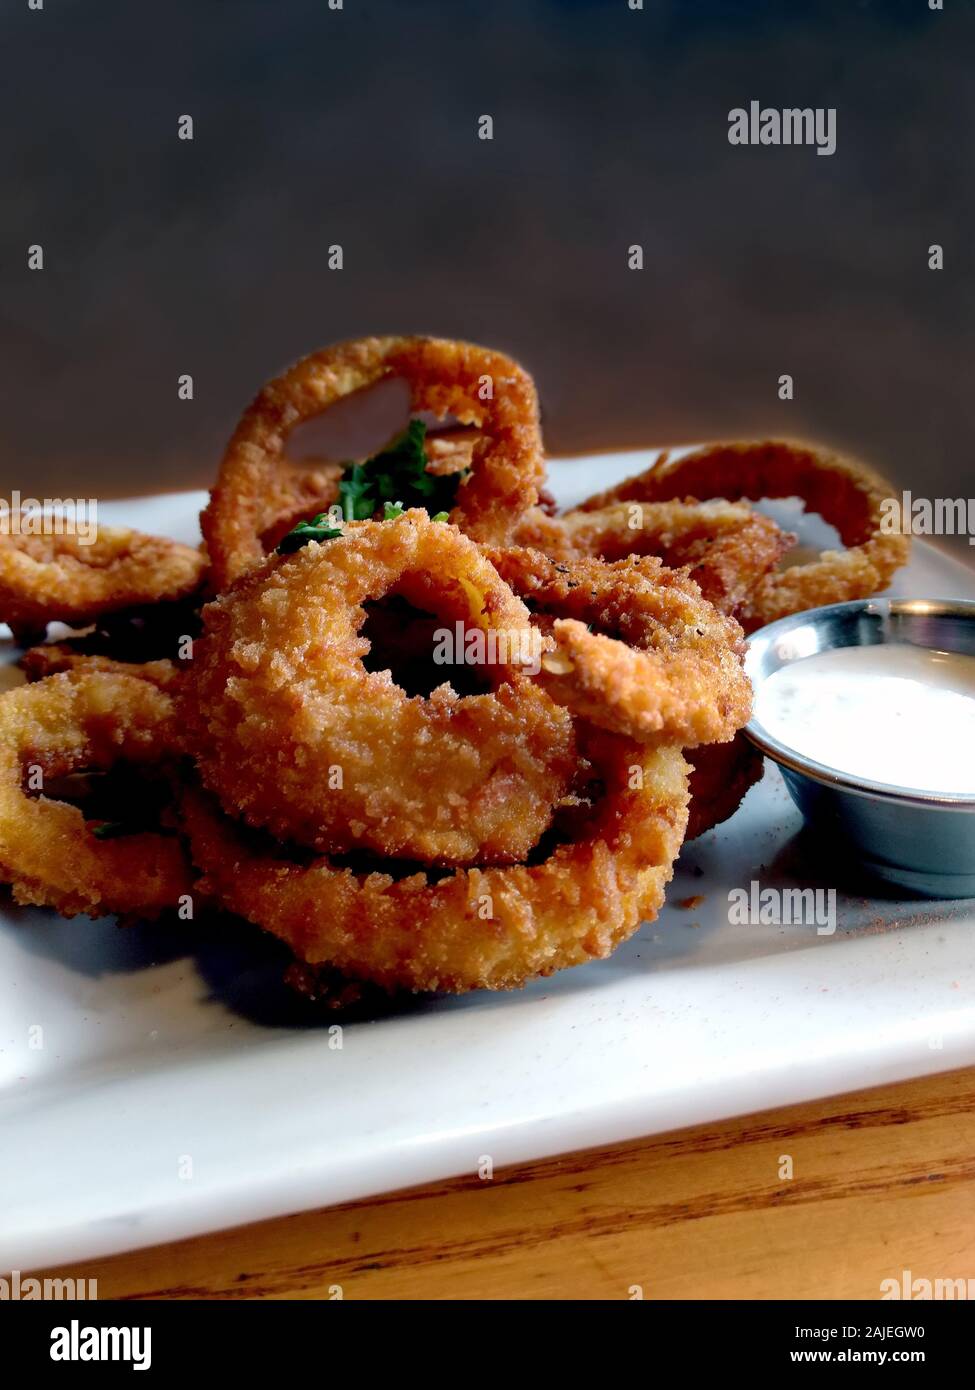 Onions Rings High Resolution Stock Photography and Images - Alamy